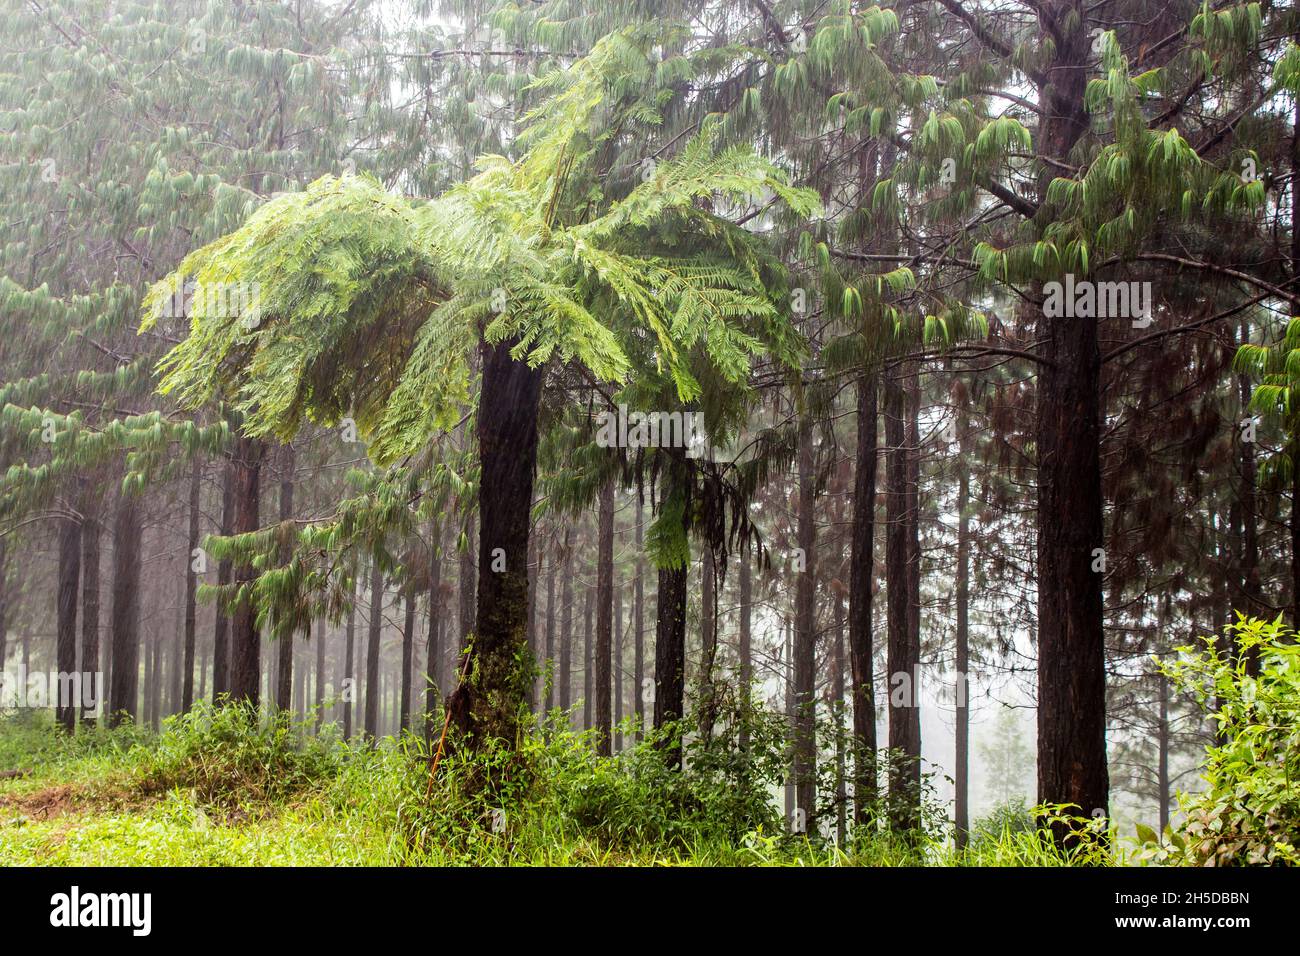 A large forest tree fern, Cyathea capensis, in front of the straight trunks of a pine plantation, shrouded in mist, in Magoebaskloof, South Africa. Stock Photo